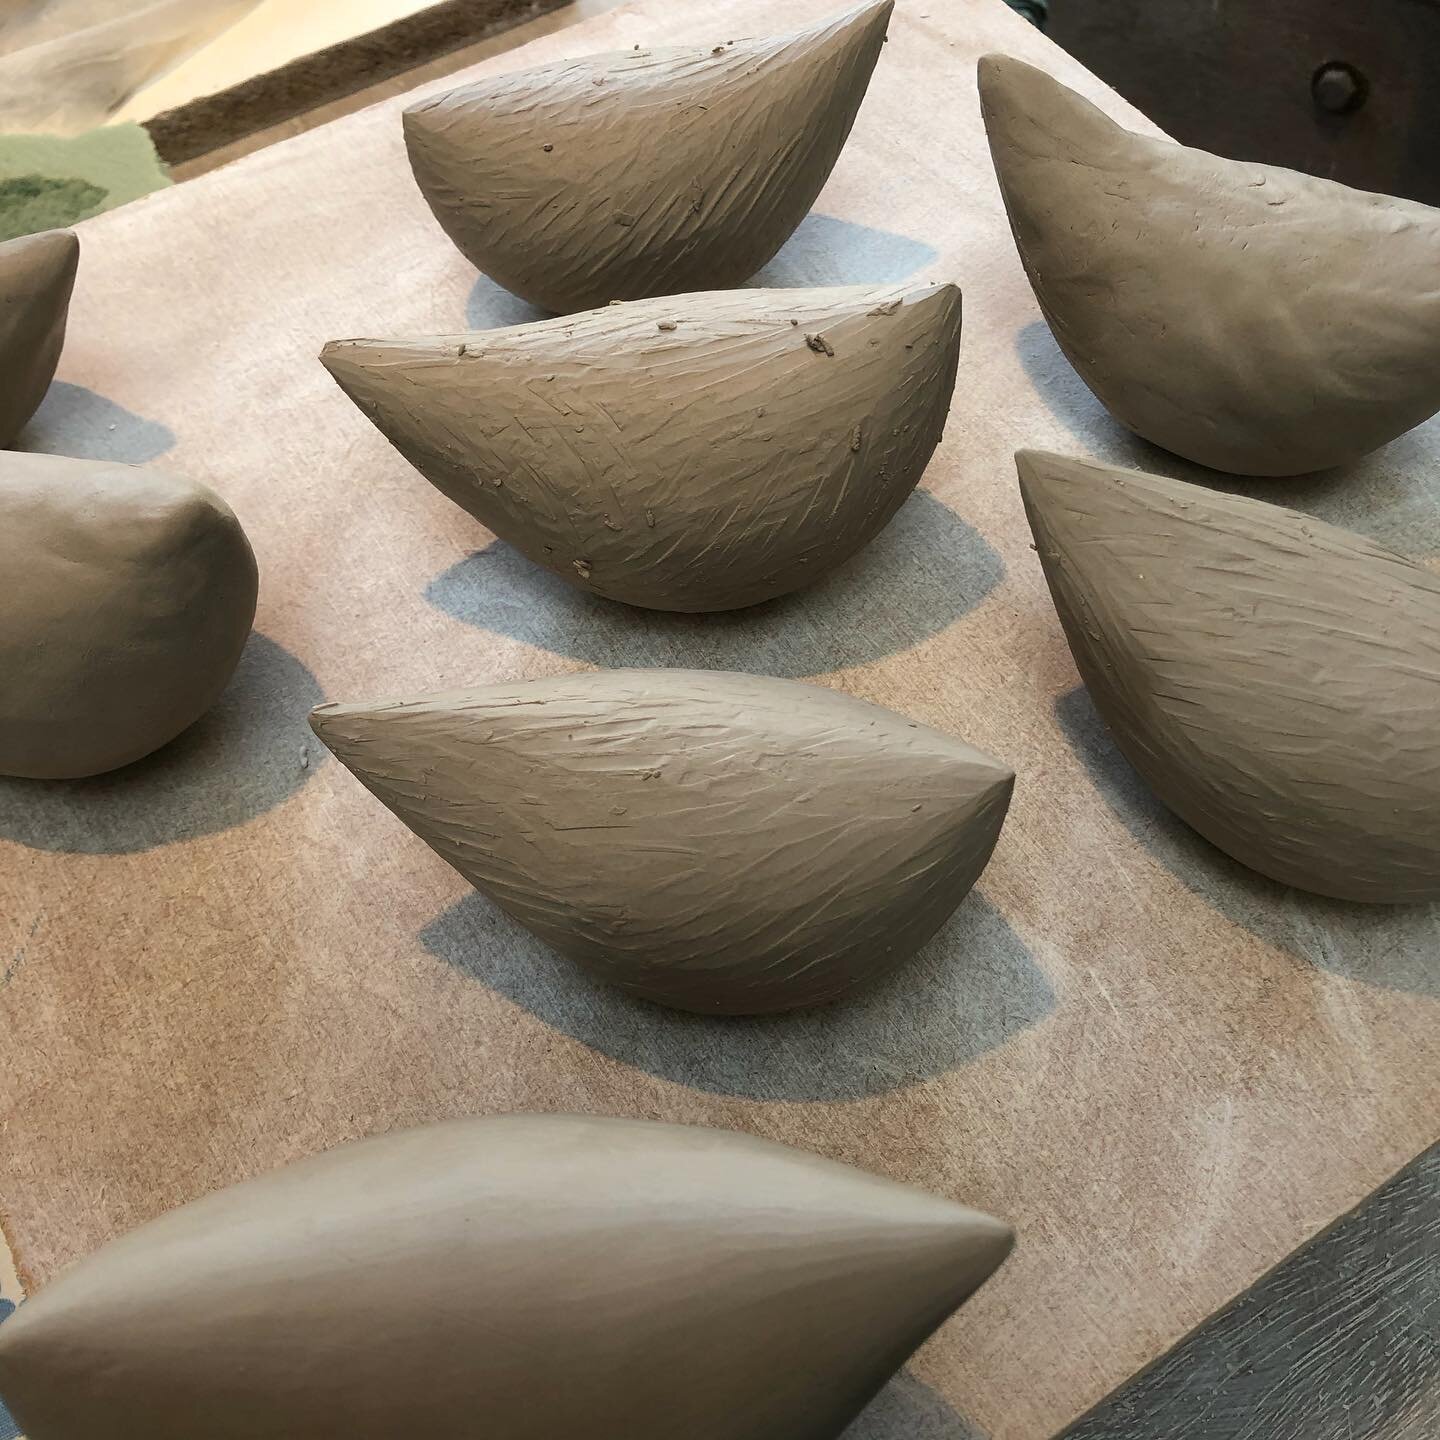 Enjoying making these large hollow birds today . They are made joining two pinched forms together then shaped and smoothed in stages with different tools . They are very time consuming but love the process . #slowmaking #handbuiltceramics #ceramicbir